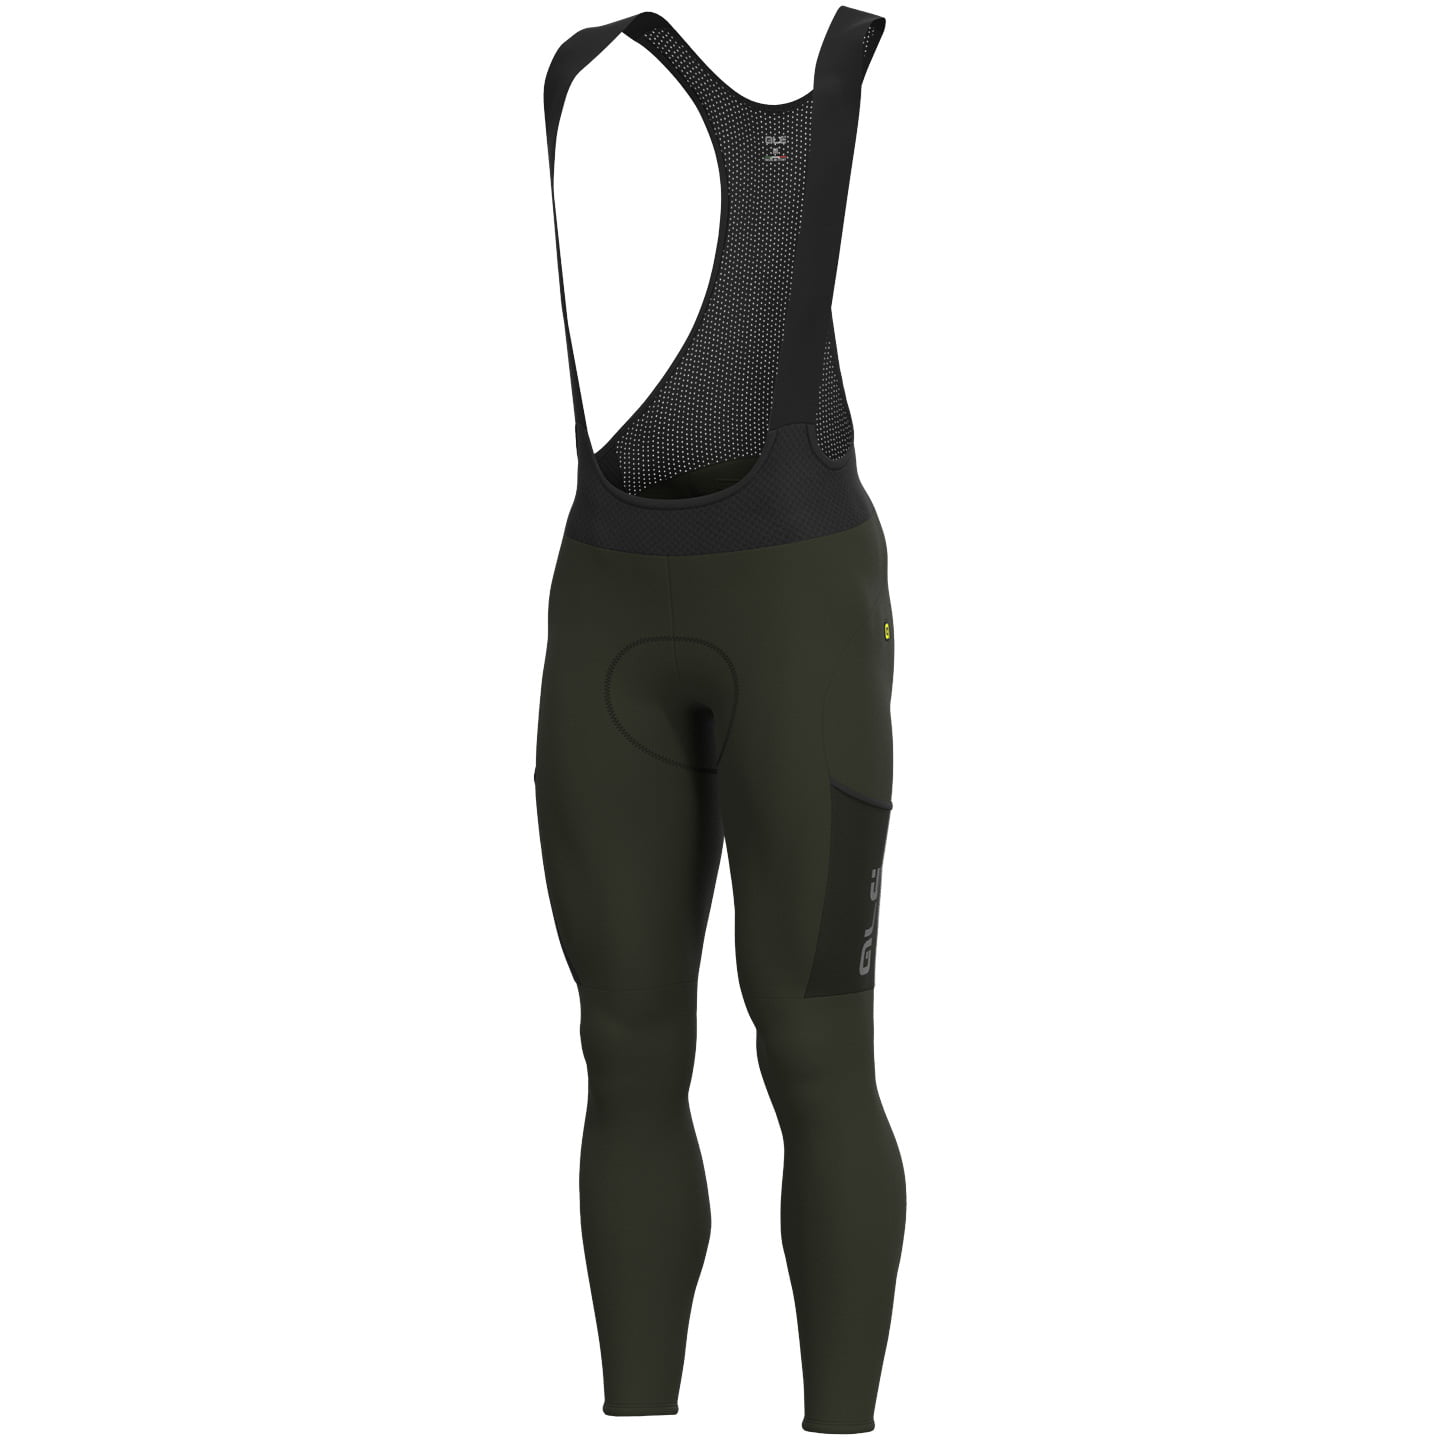 ALE Stones Cargo Bib Tights Bib Tights, for men, size L, Cycle tights, Cycling clothing